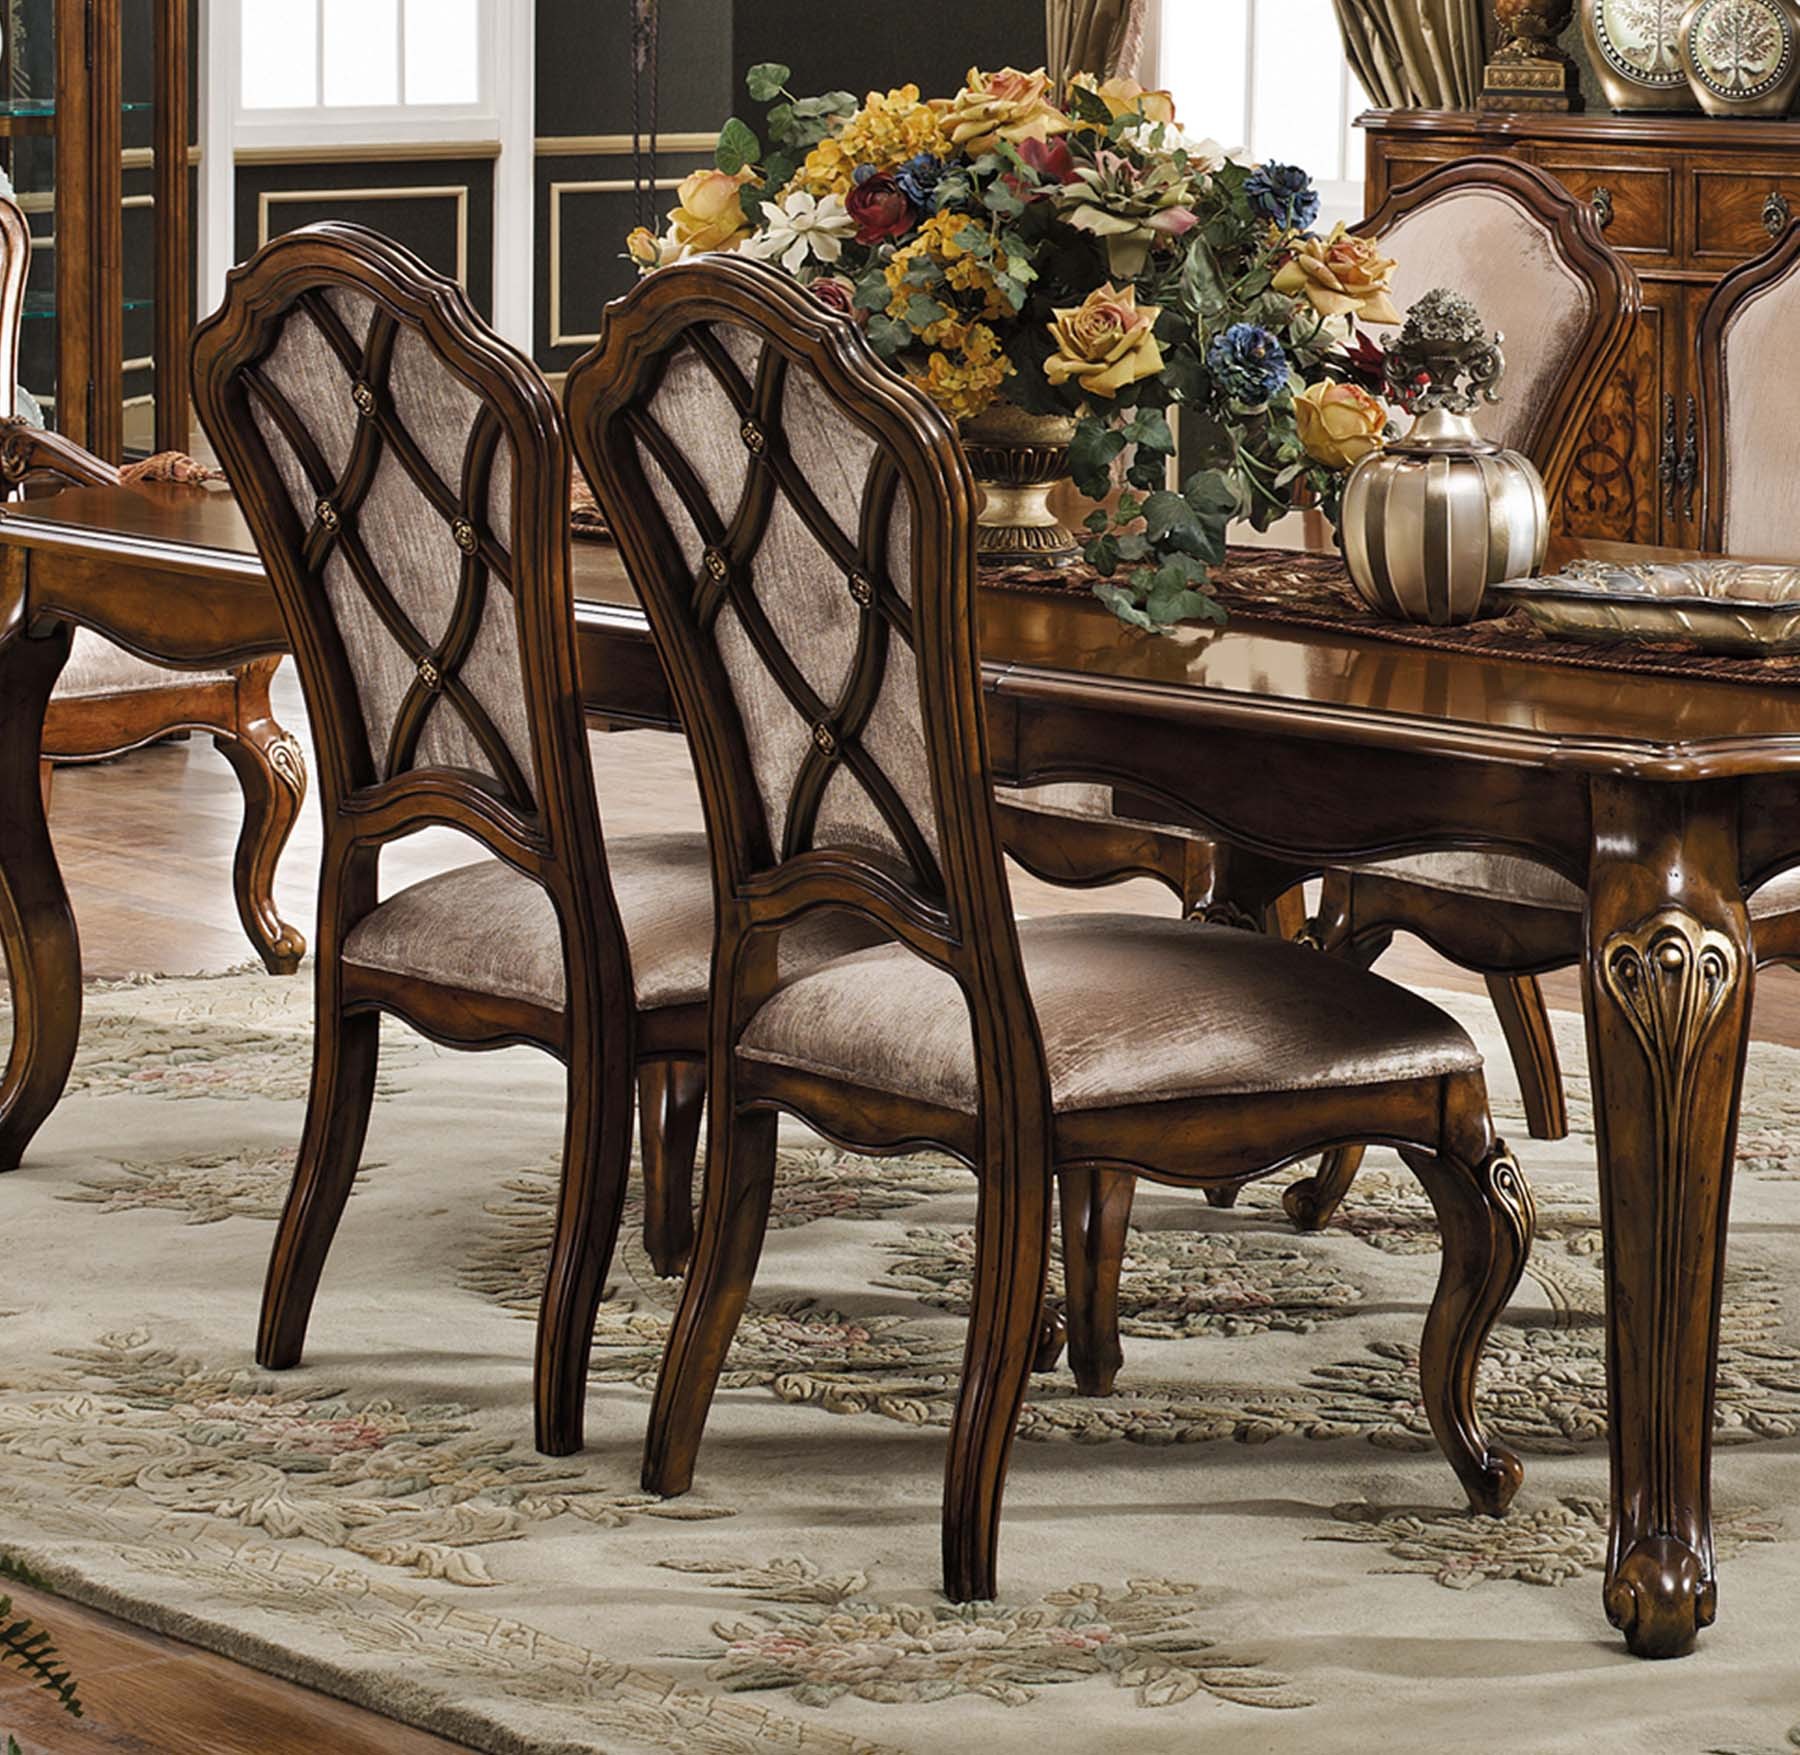 Carneros Dining Side Chair shown in Antique Walnut finish